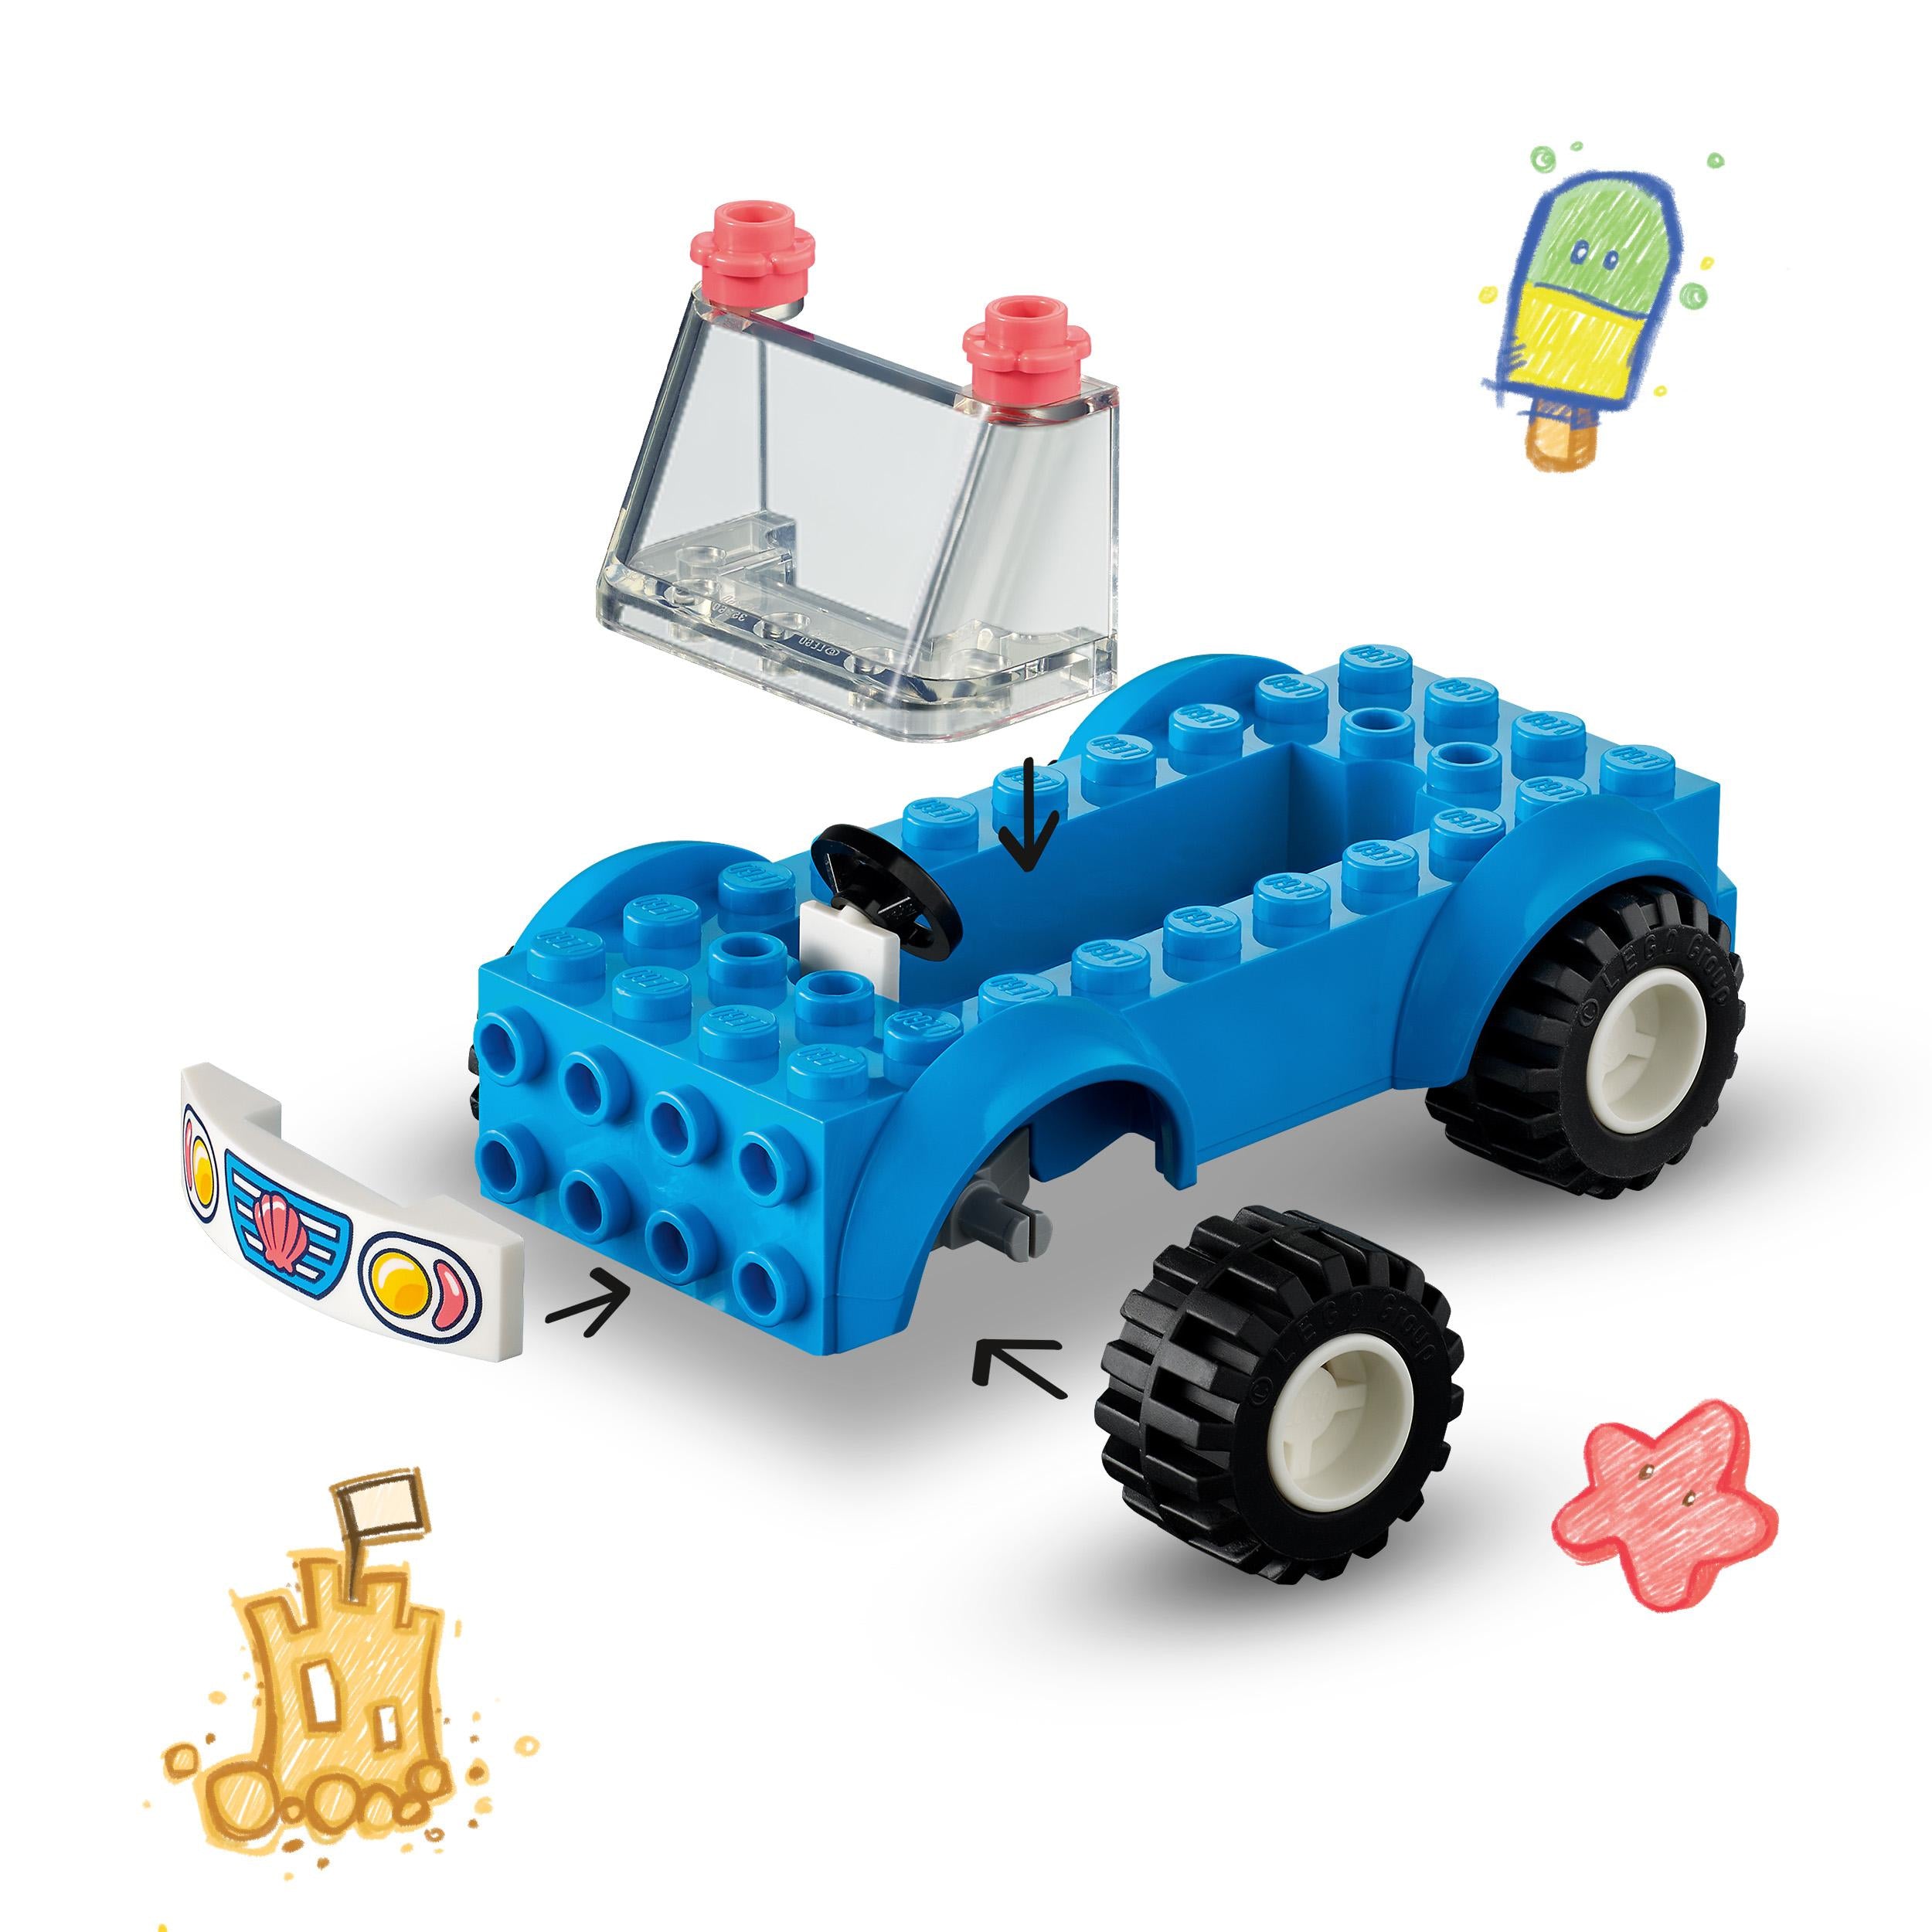 LEGO 41725 Friends Beach Buggy Fun Set with Toy Car, Surf Board, Mini-Dolls plus Dolphin and Dog Animal Figures, Summer Playset for  4 Plus Years Old Kids, Girls, Boys